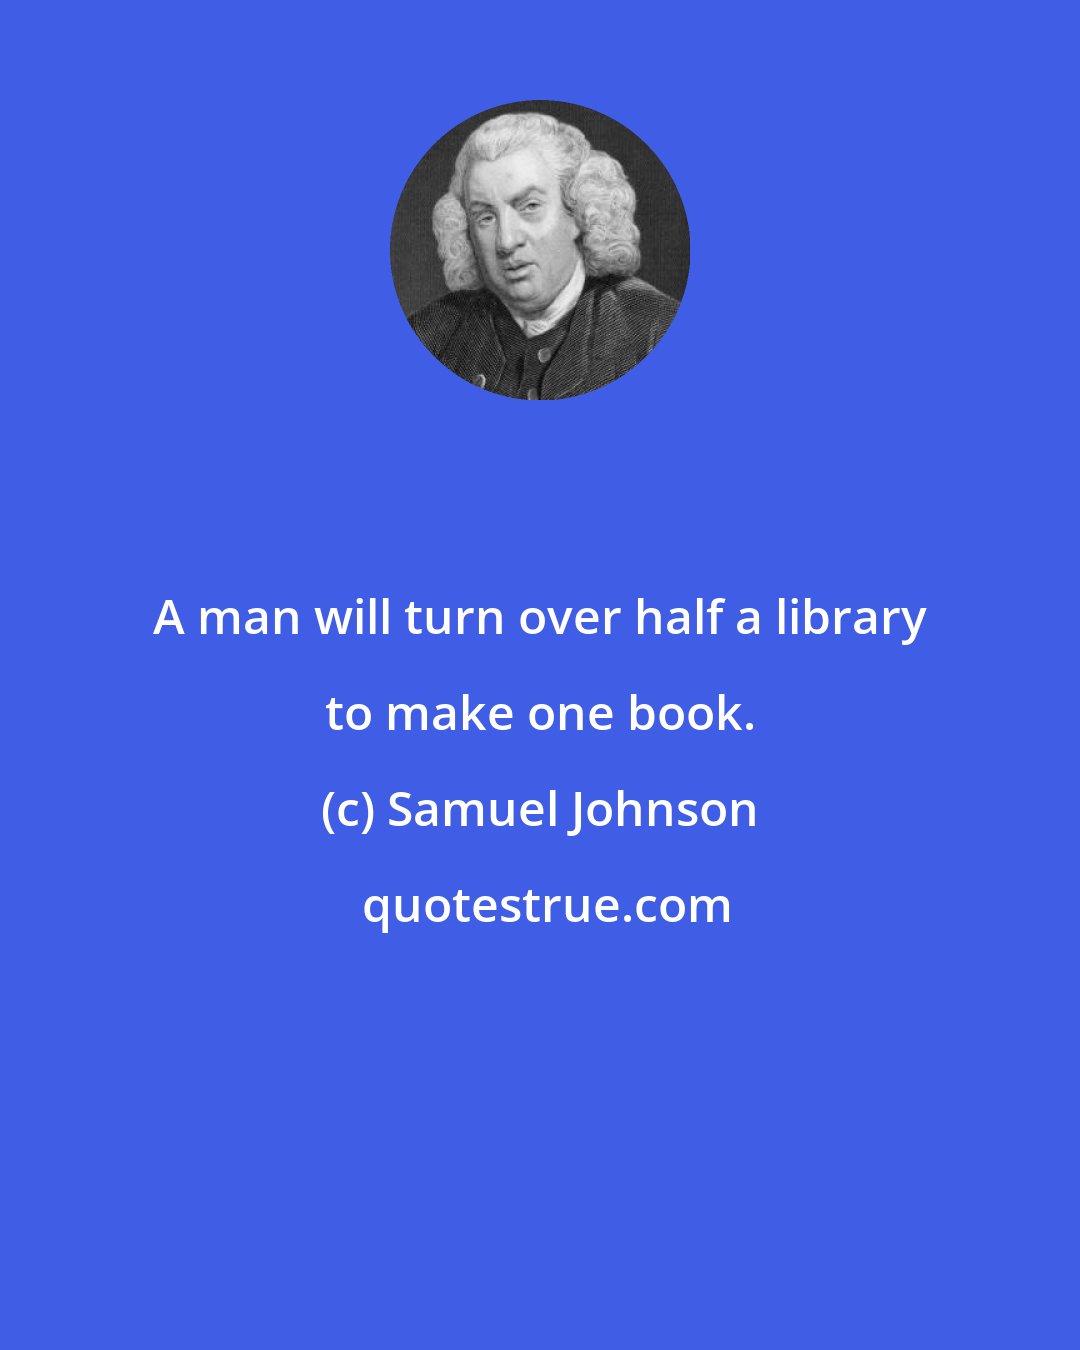 Samuel Johnson: A man will turn over half a library to make one book.